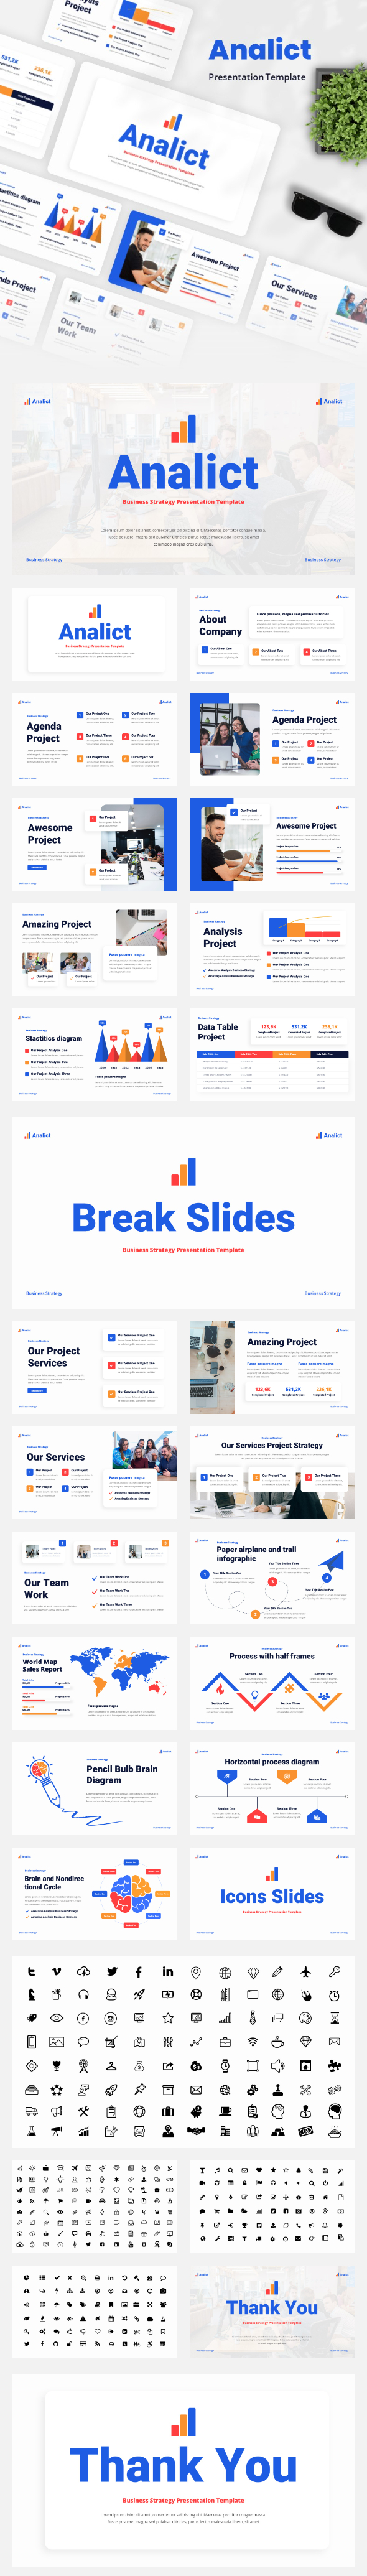 Analict - Business Strategy Google Slides Template